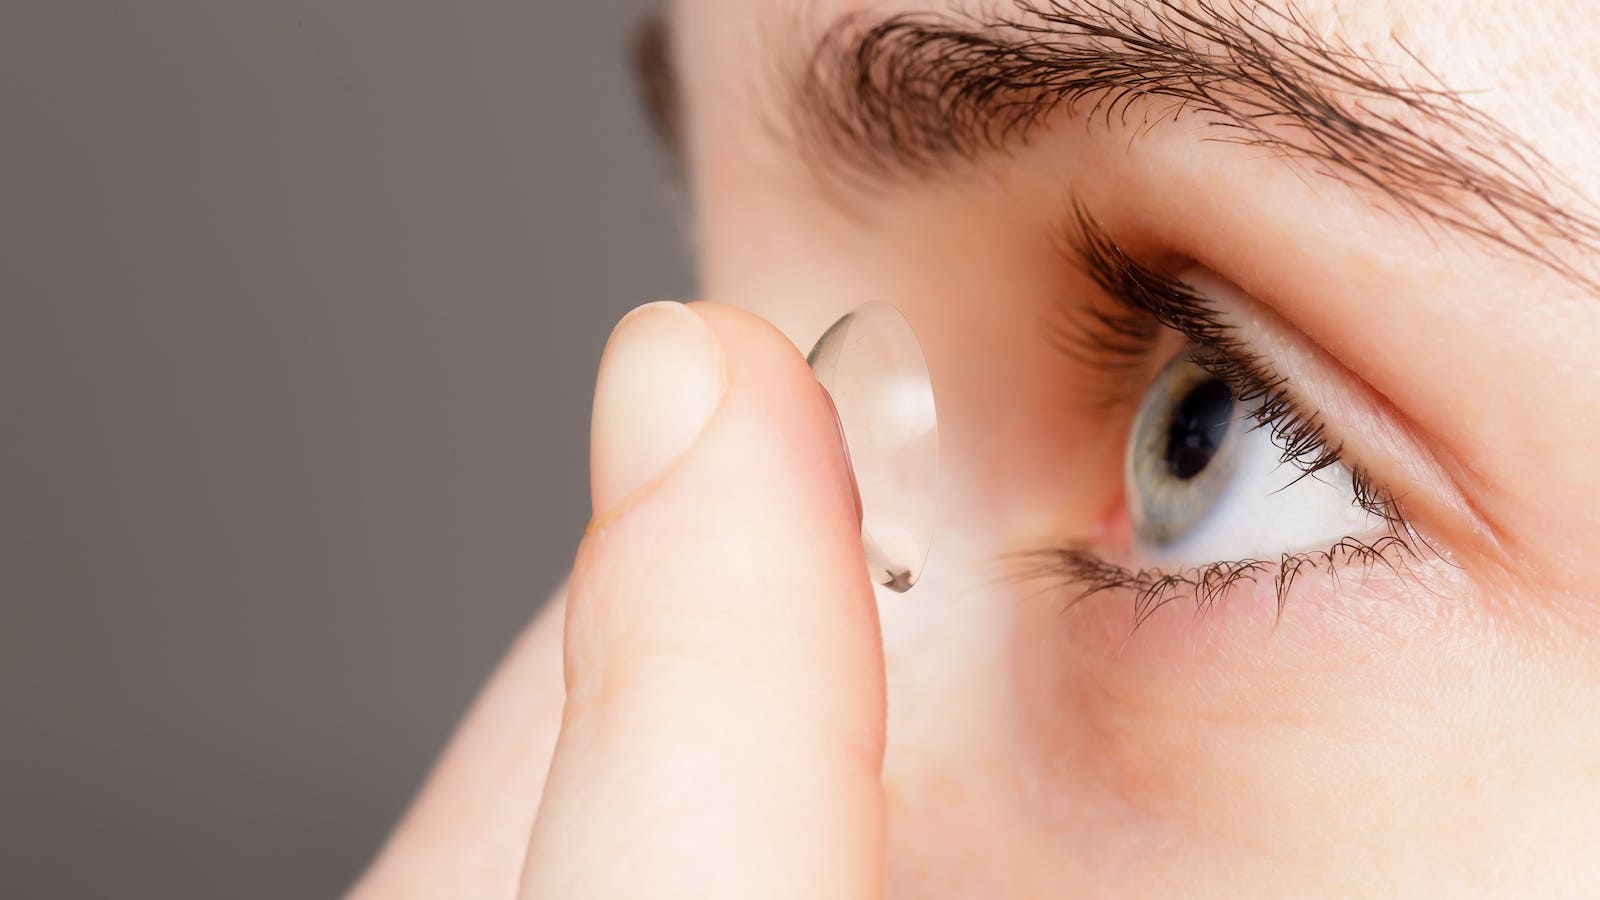 Doctor Finds 23 Contact Lenses Under Patient's Eyelid